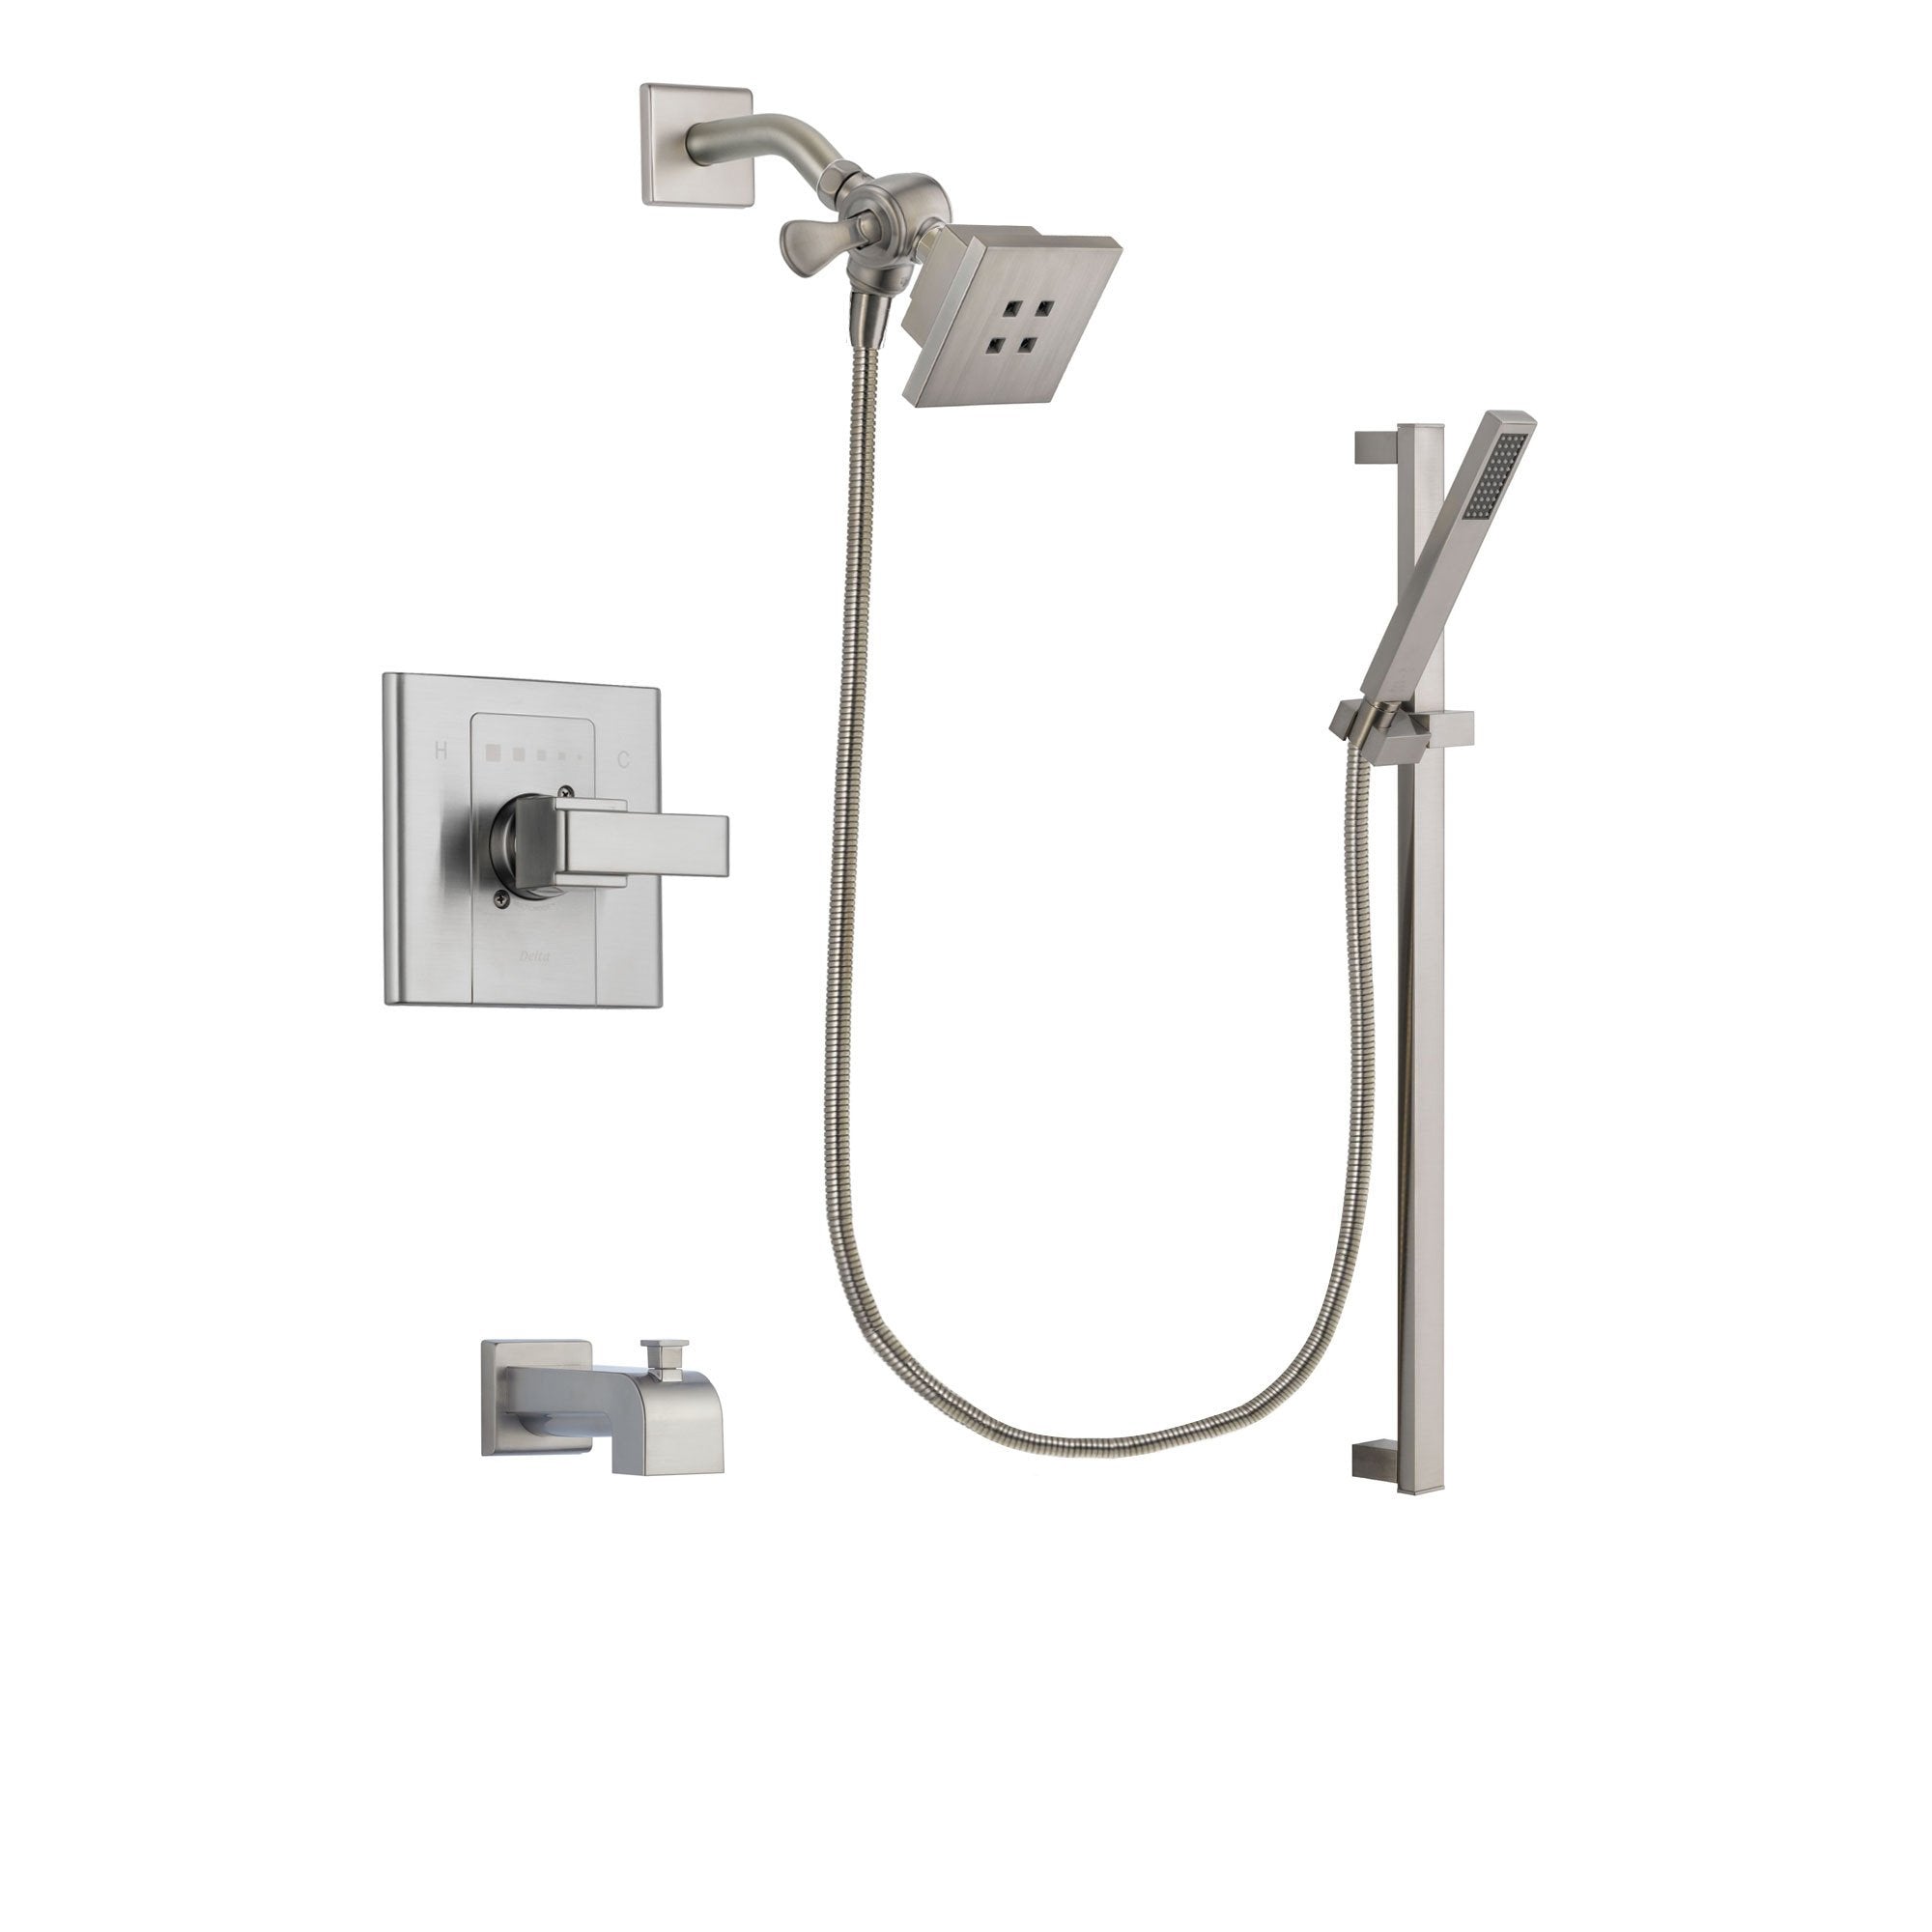 Delta Arzo Stainless Steel Finish Tub and Shower Faucet System Package with Square Showerhead and Modern Personal Hand Shower with Slide Bar Includes Rough-in Valve and Tub Spout DSP2337V